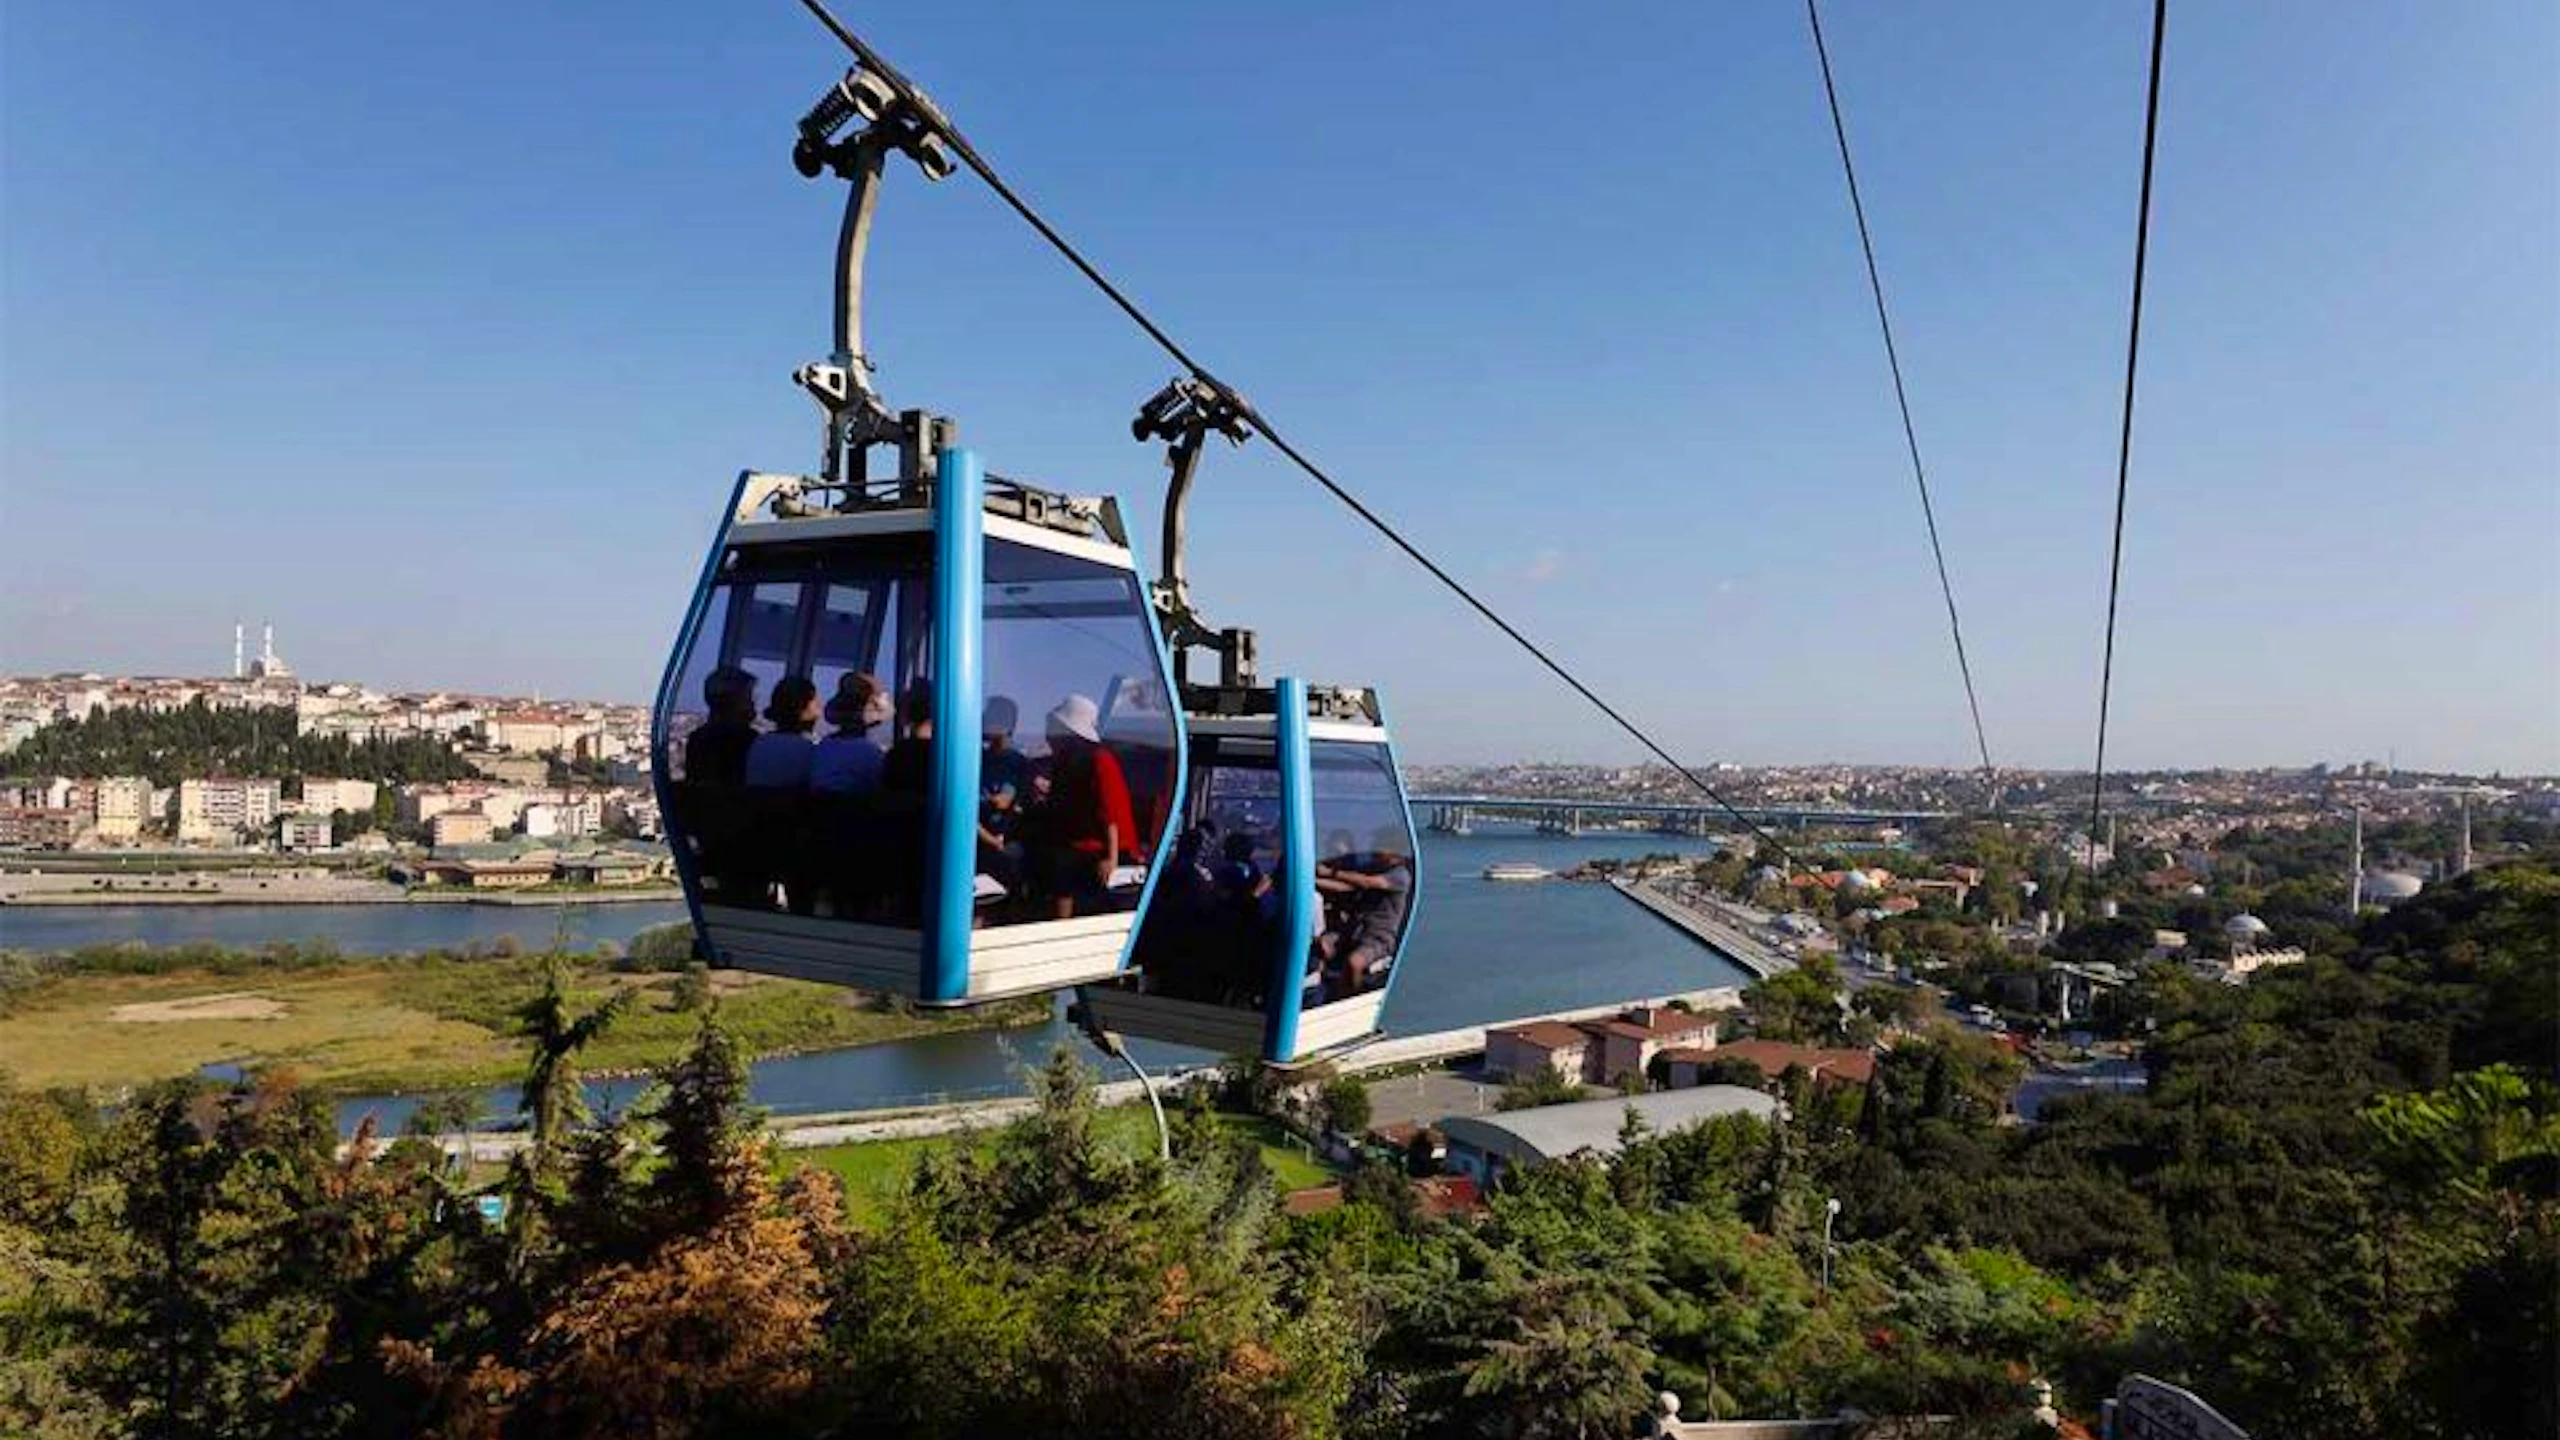 Istanbul Bosphorus Cruise Tour, Bus and Cable Car Ride Ticket